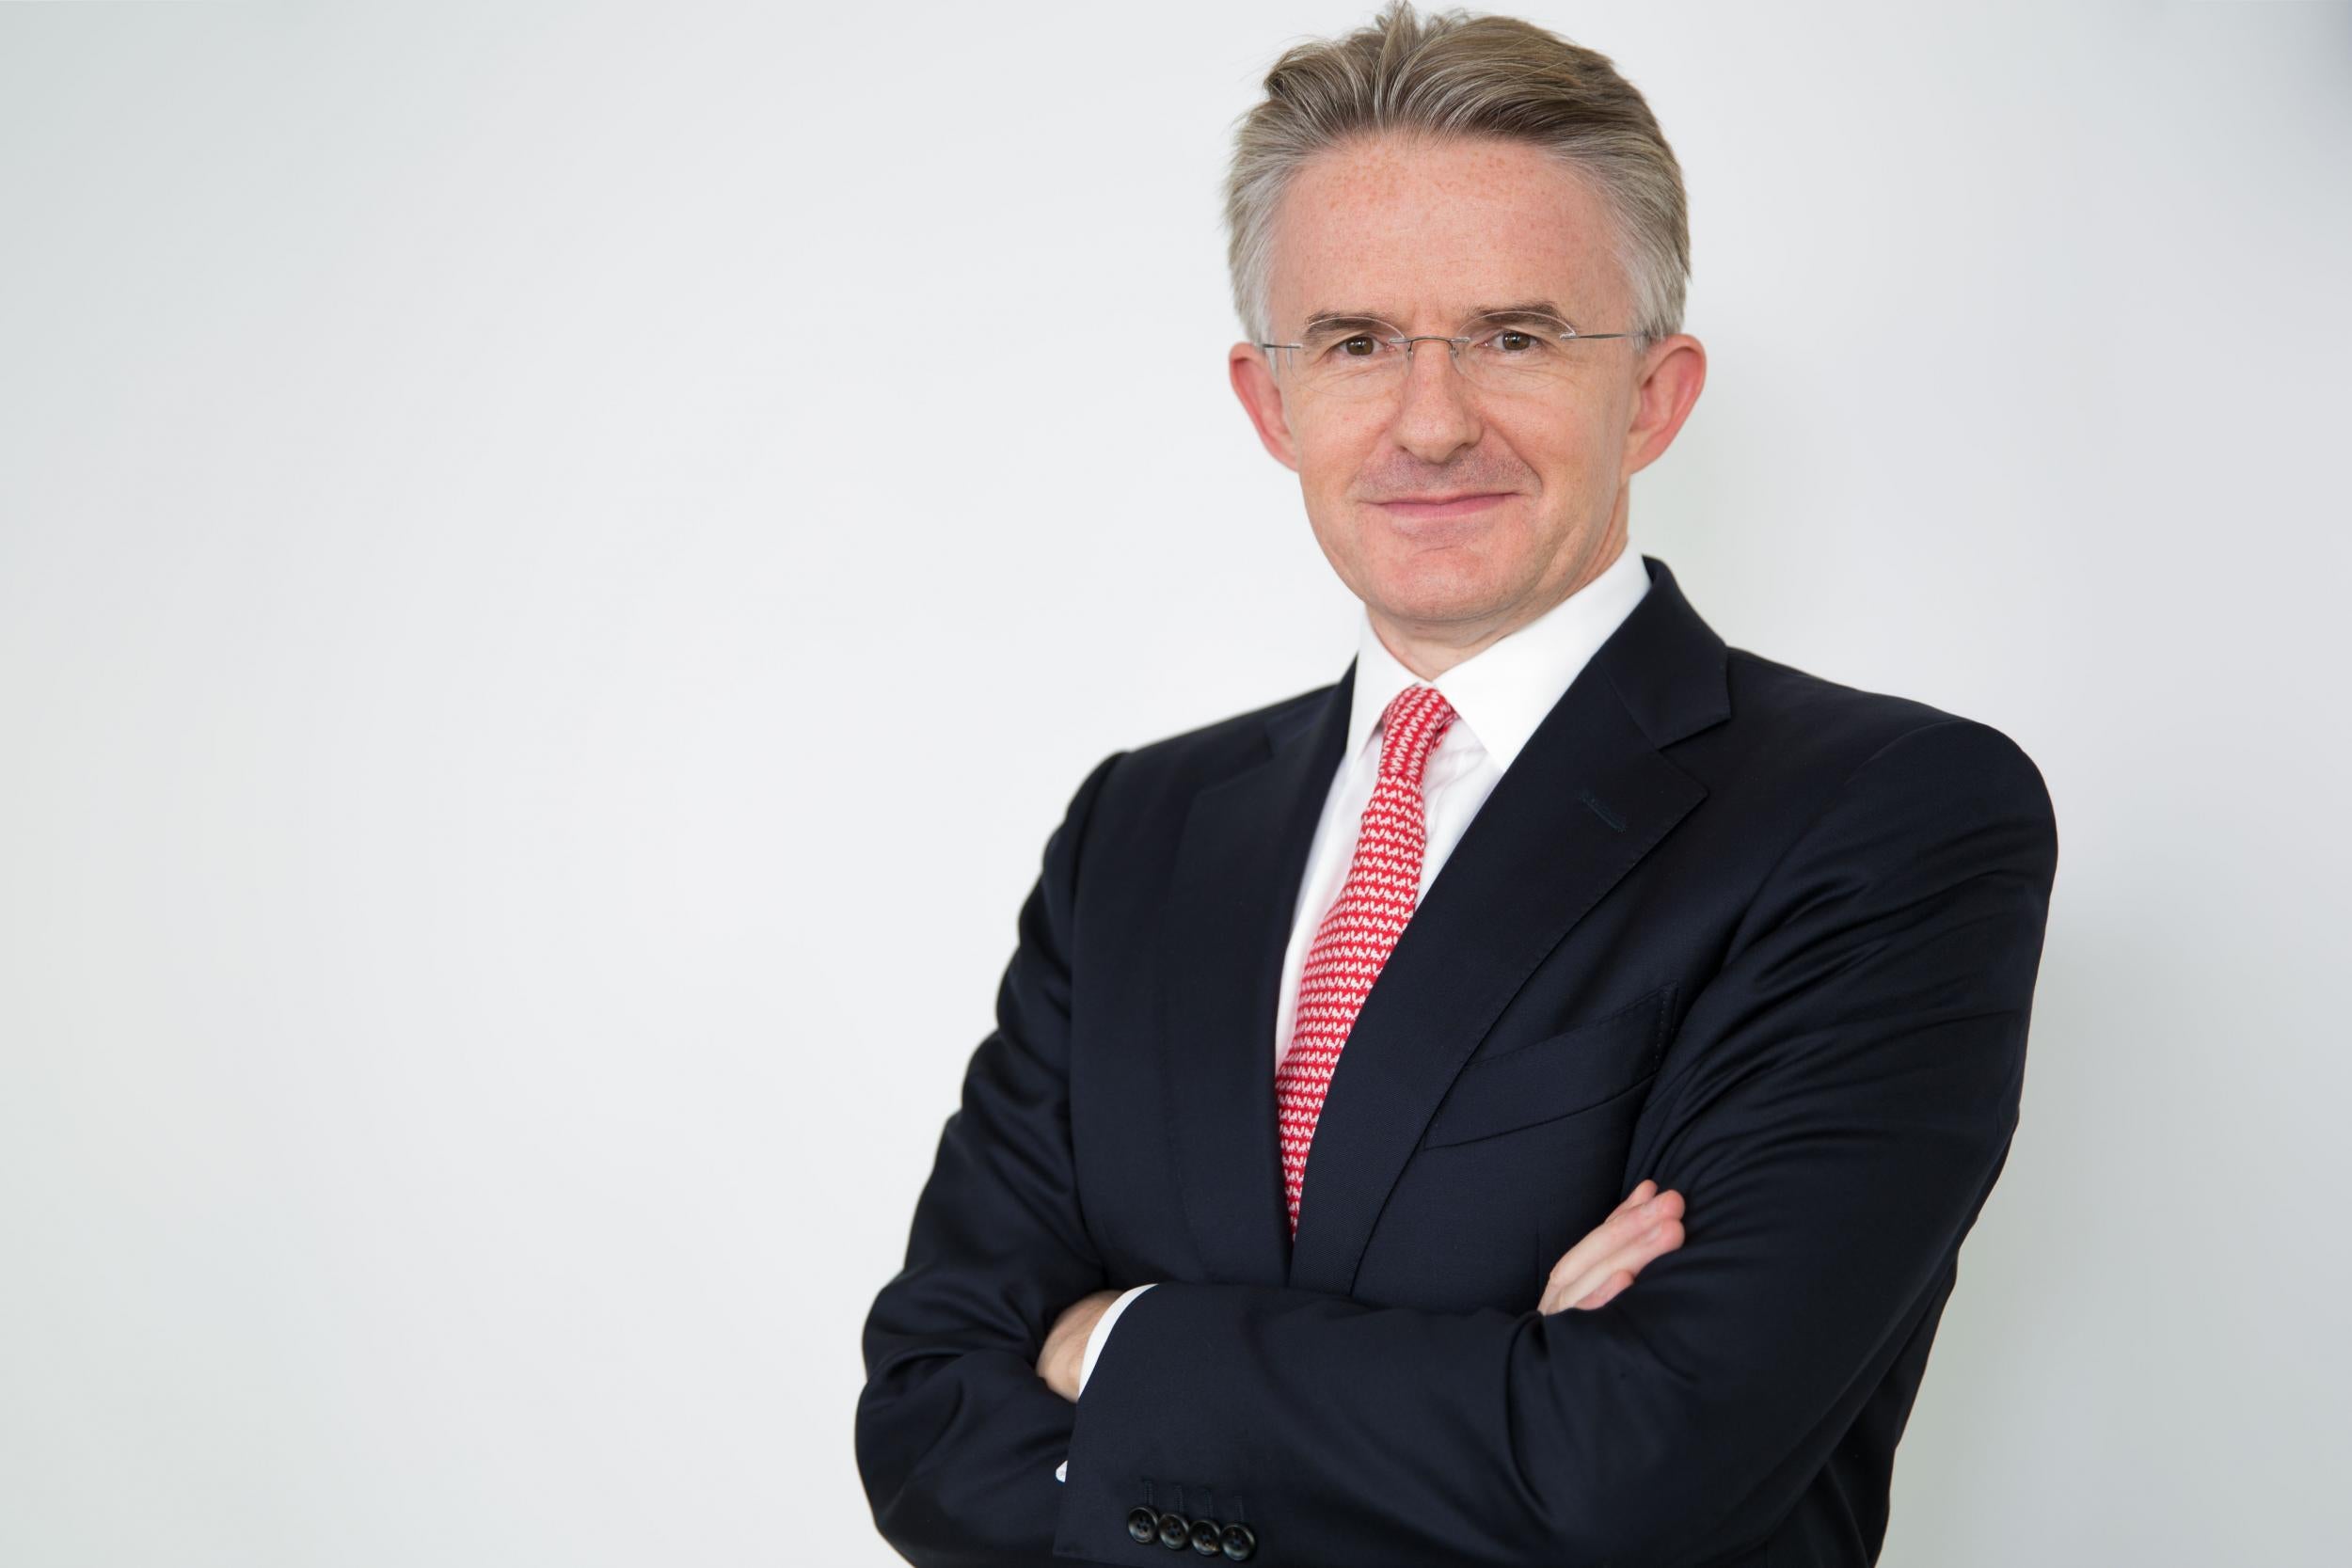 John Flint currently heads up retail banking and wealth management at HSBC